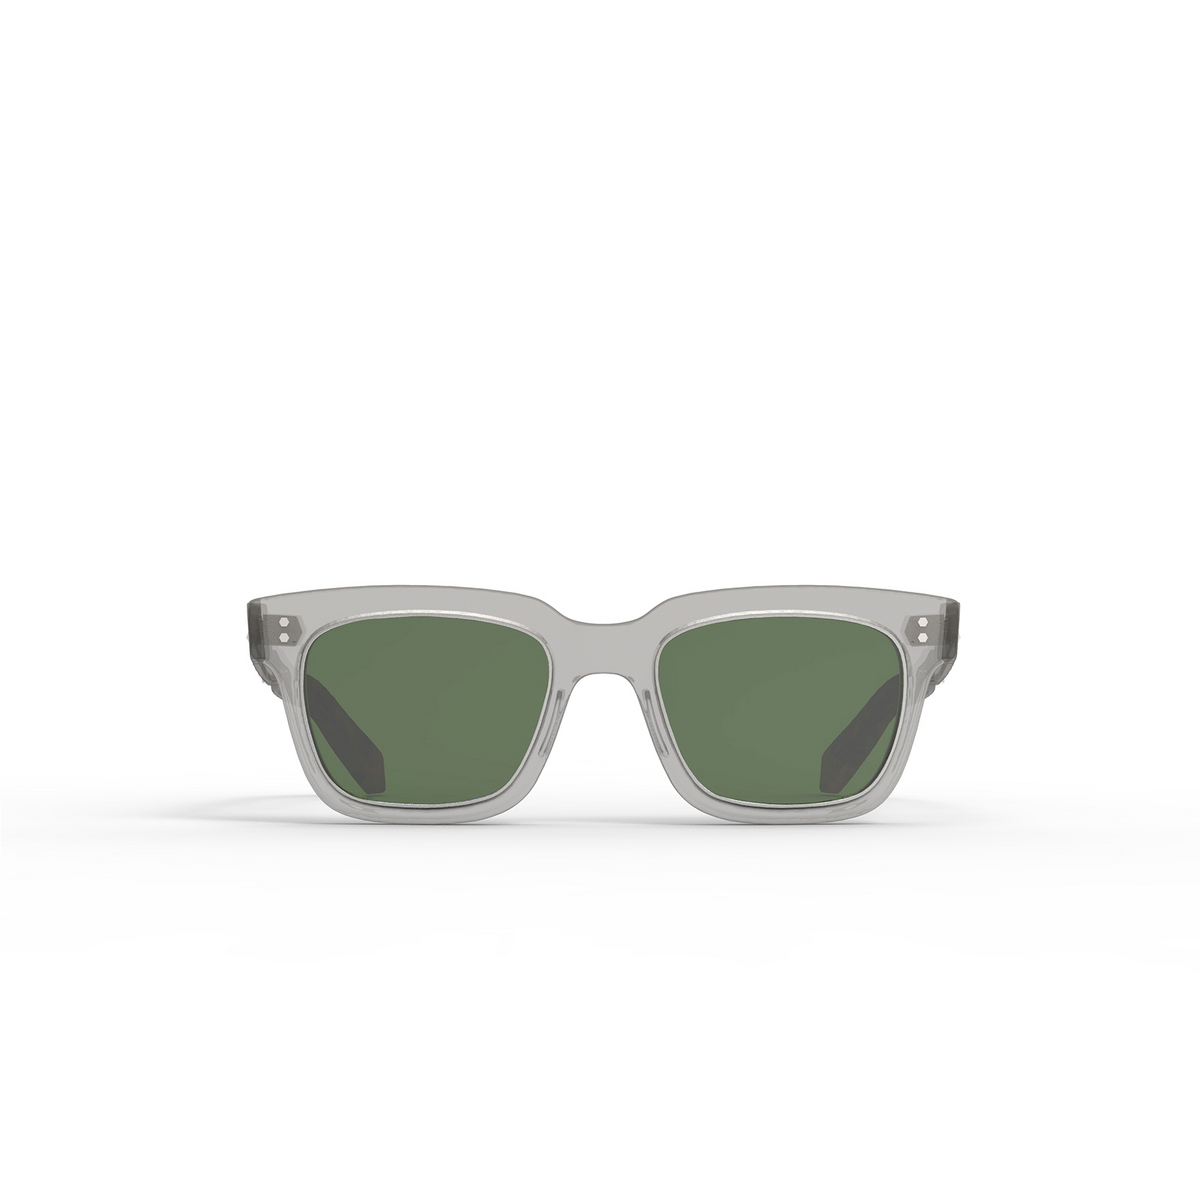 Mr. Leight ARNIE S Sunglasses GRYCRY-MPLT/GRN Grey Crystal-Matte Platinum - front view